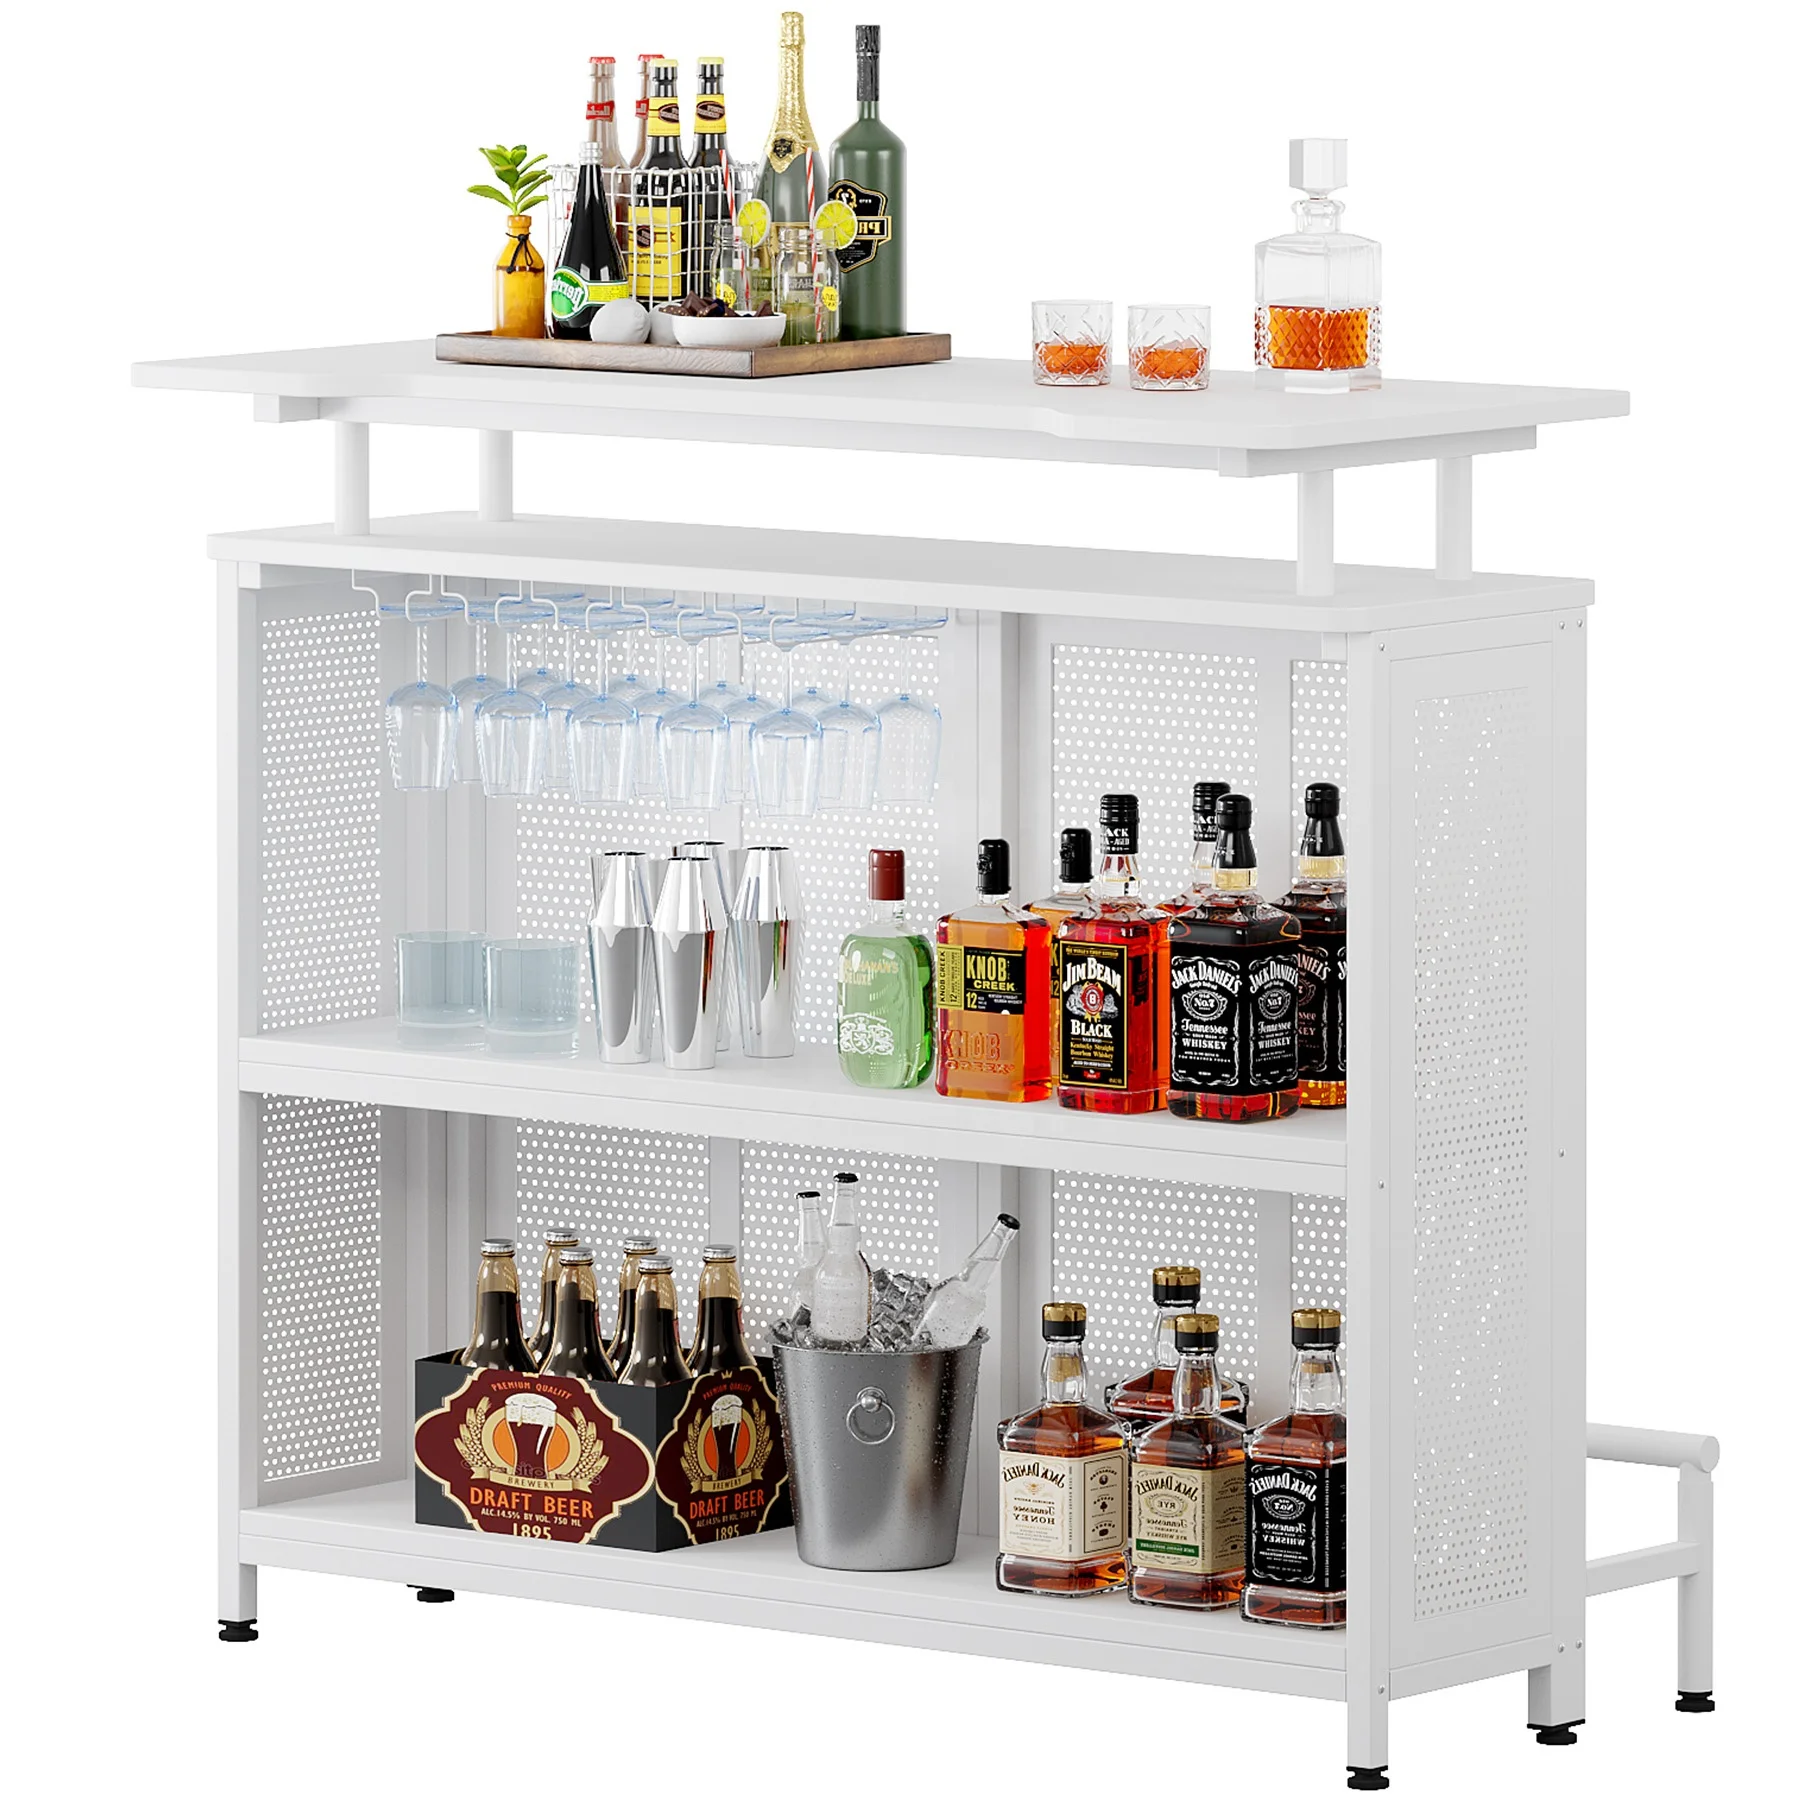 Tribesigns 3 tier Wine rack bar unit with open storage shelves and glass holder cabinet coffee table for holiday pub set